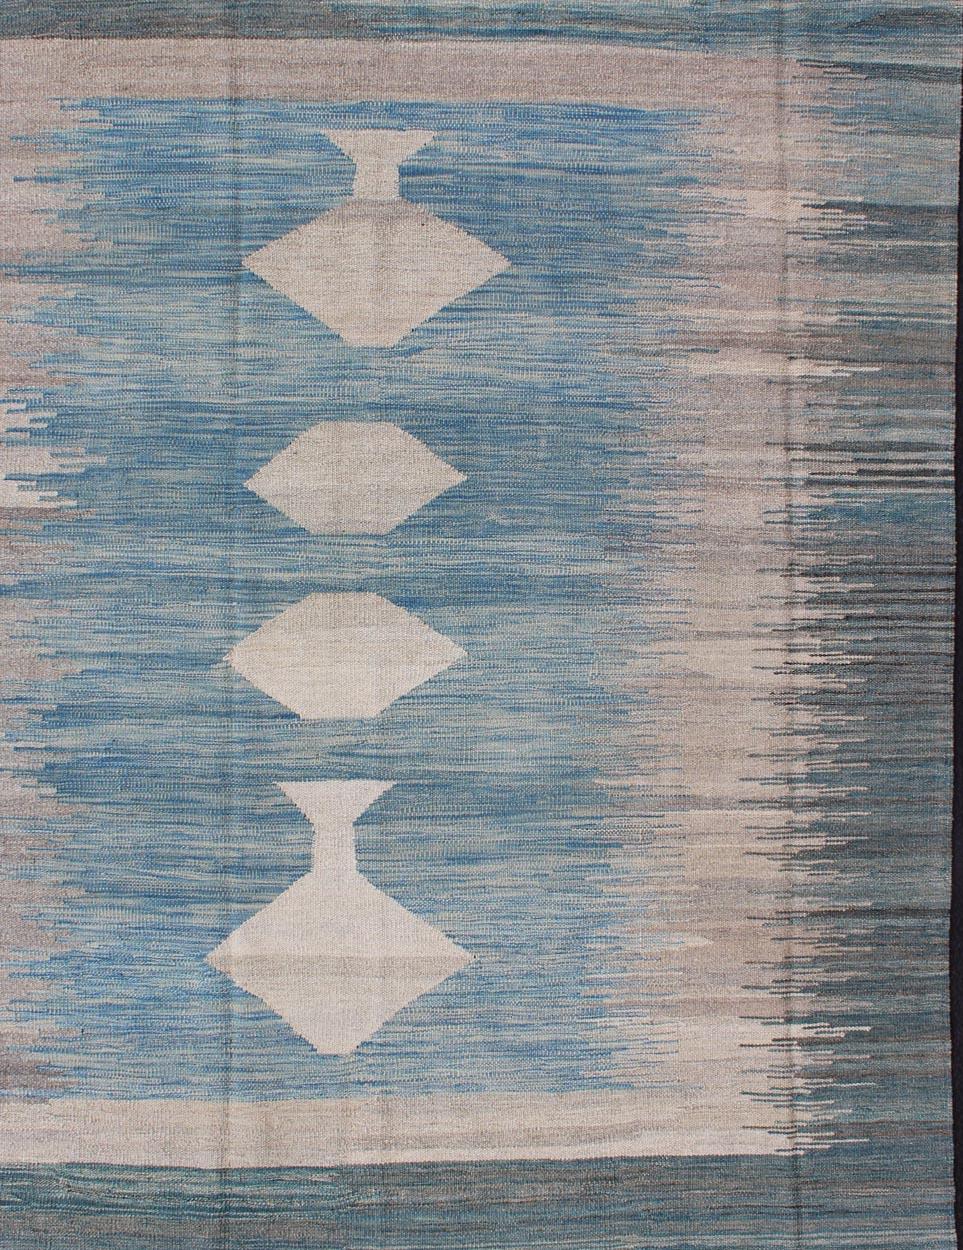 Flat-weave Kilim rug with diamonds design in shades of blue, gray, greens, rug afg-6490, country of origin / type: Afghanistan / Kilim

This playful piece features a diamond design that evokes casual and easy vibes. Perfect for modern design